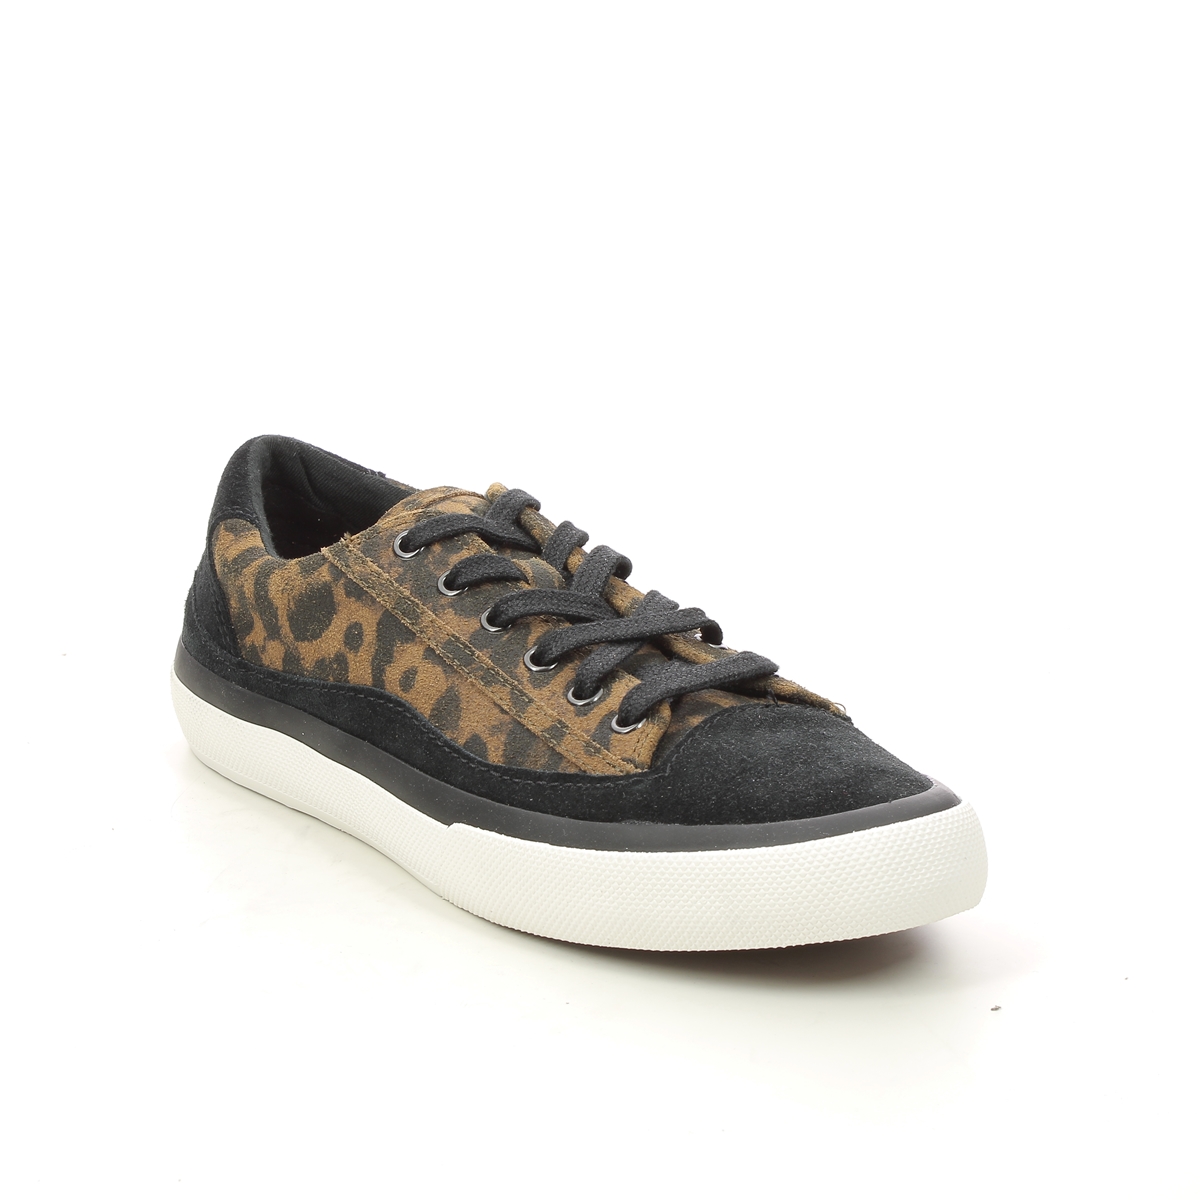 Clarks Aceley Lace Leopard print Womens trainers 6117-94D in a Leopard Leather in Size 4